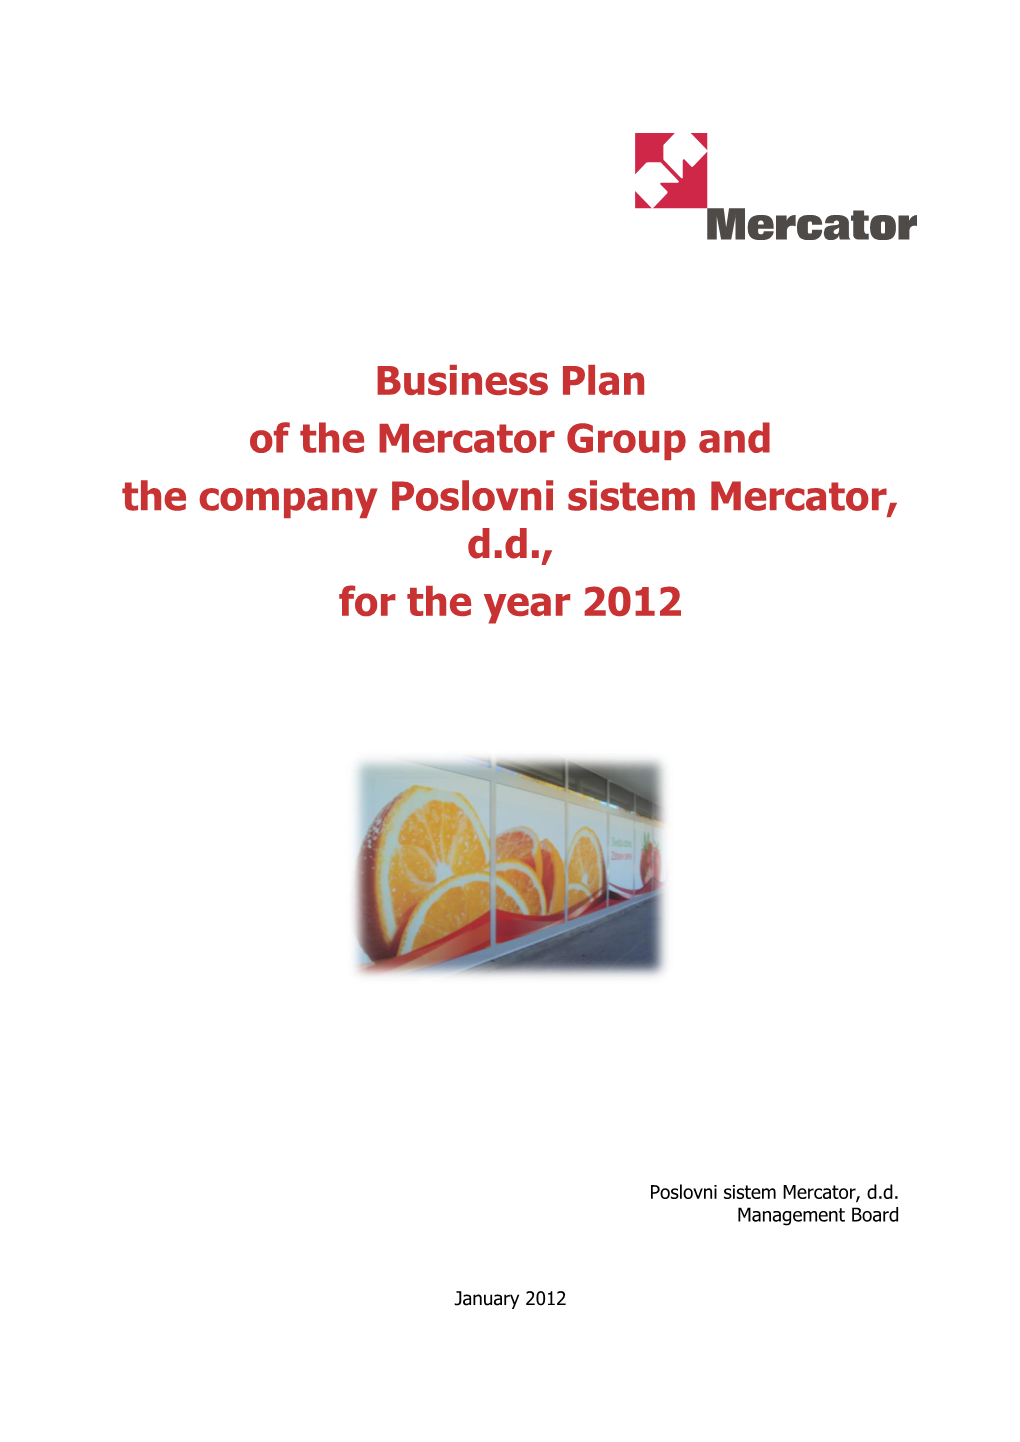 Business Plan of the Mercator Group and the Company Poslovni Sistem Mercator, D.D., for the Year 2012